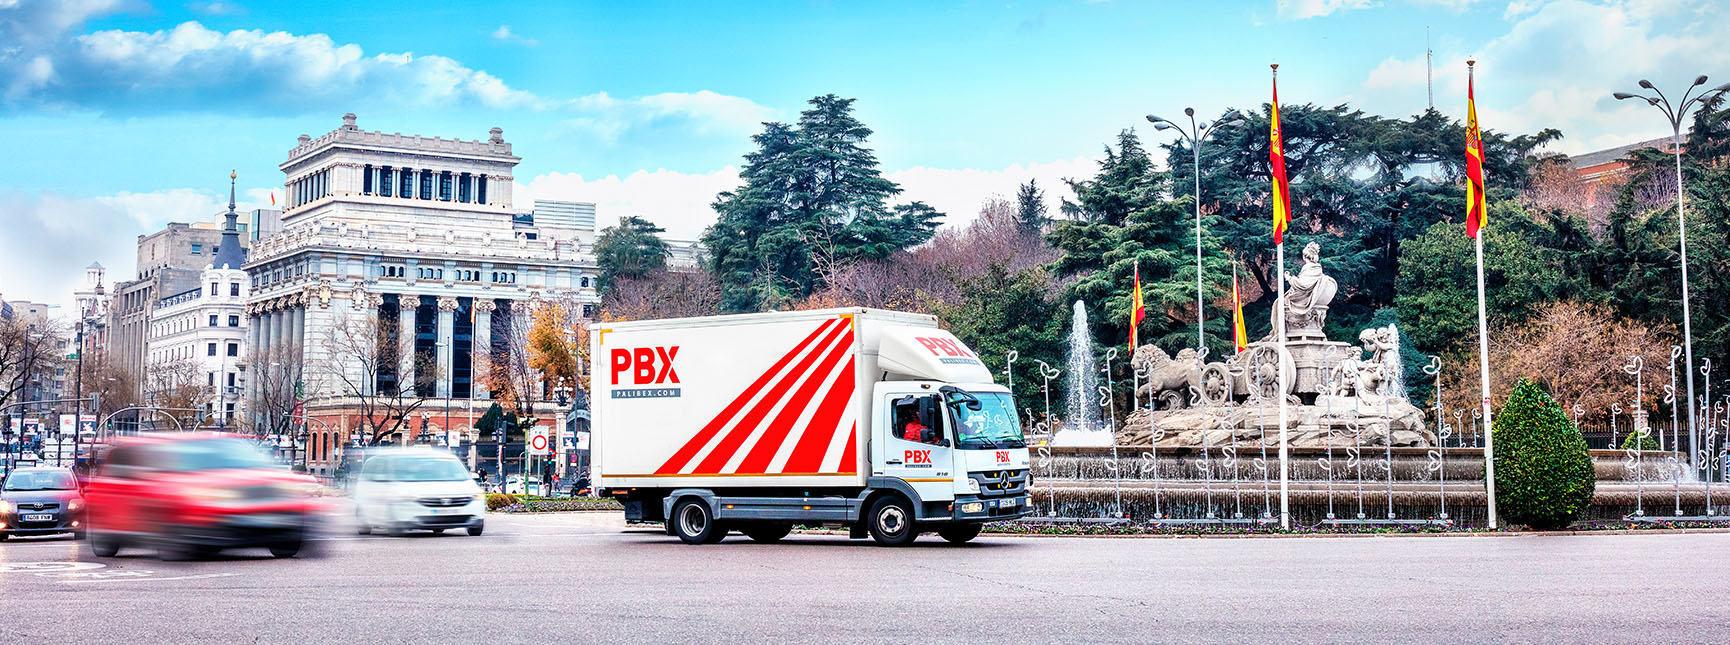 Transporte made in spain - palibex